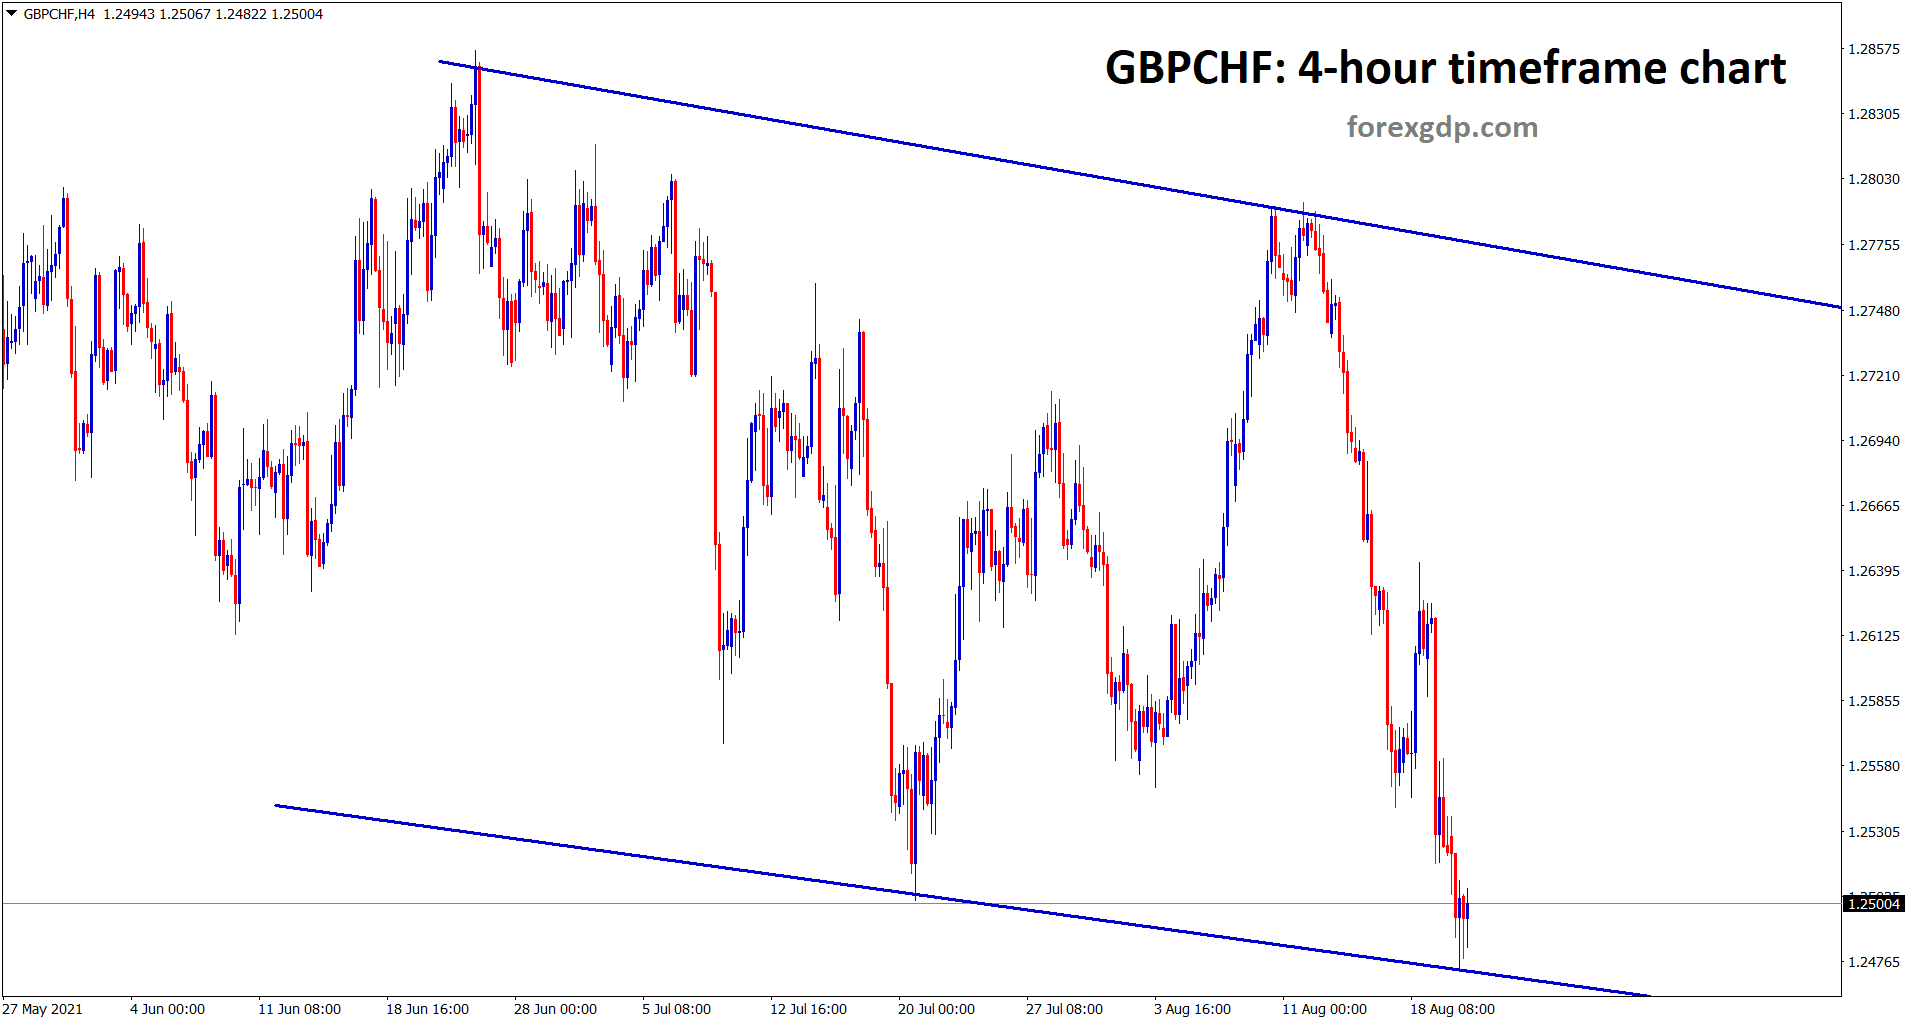 GBPCHF hits the lower low of the descending channel wait for reversal or breakout.